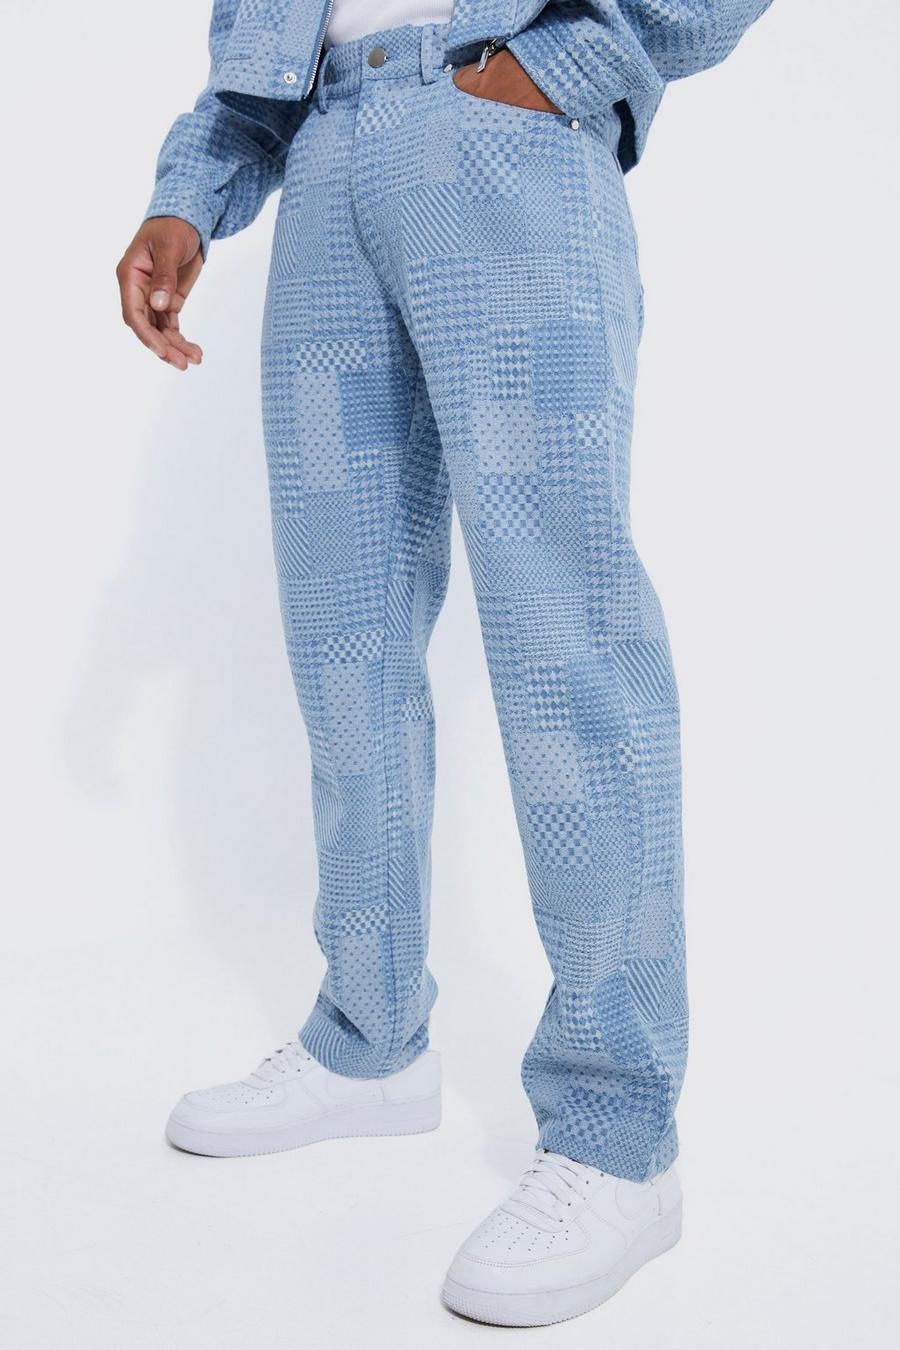 Light blue Relaxed Rigid Fabric Jeans